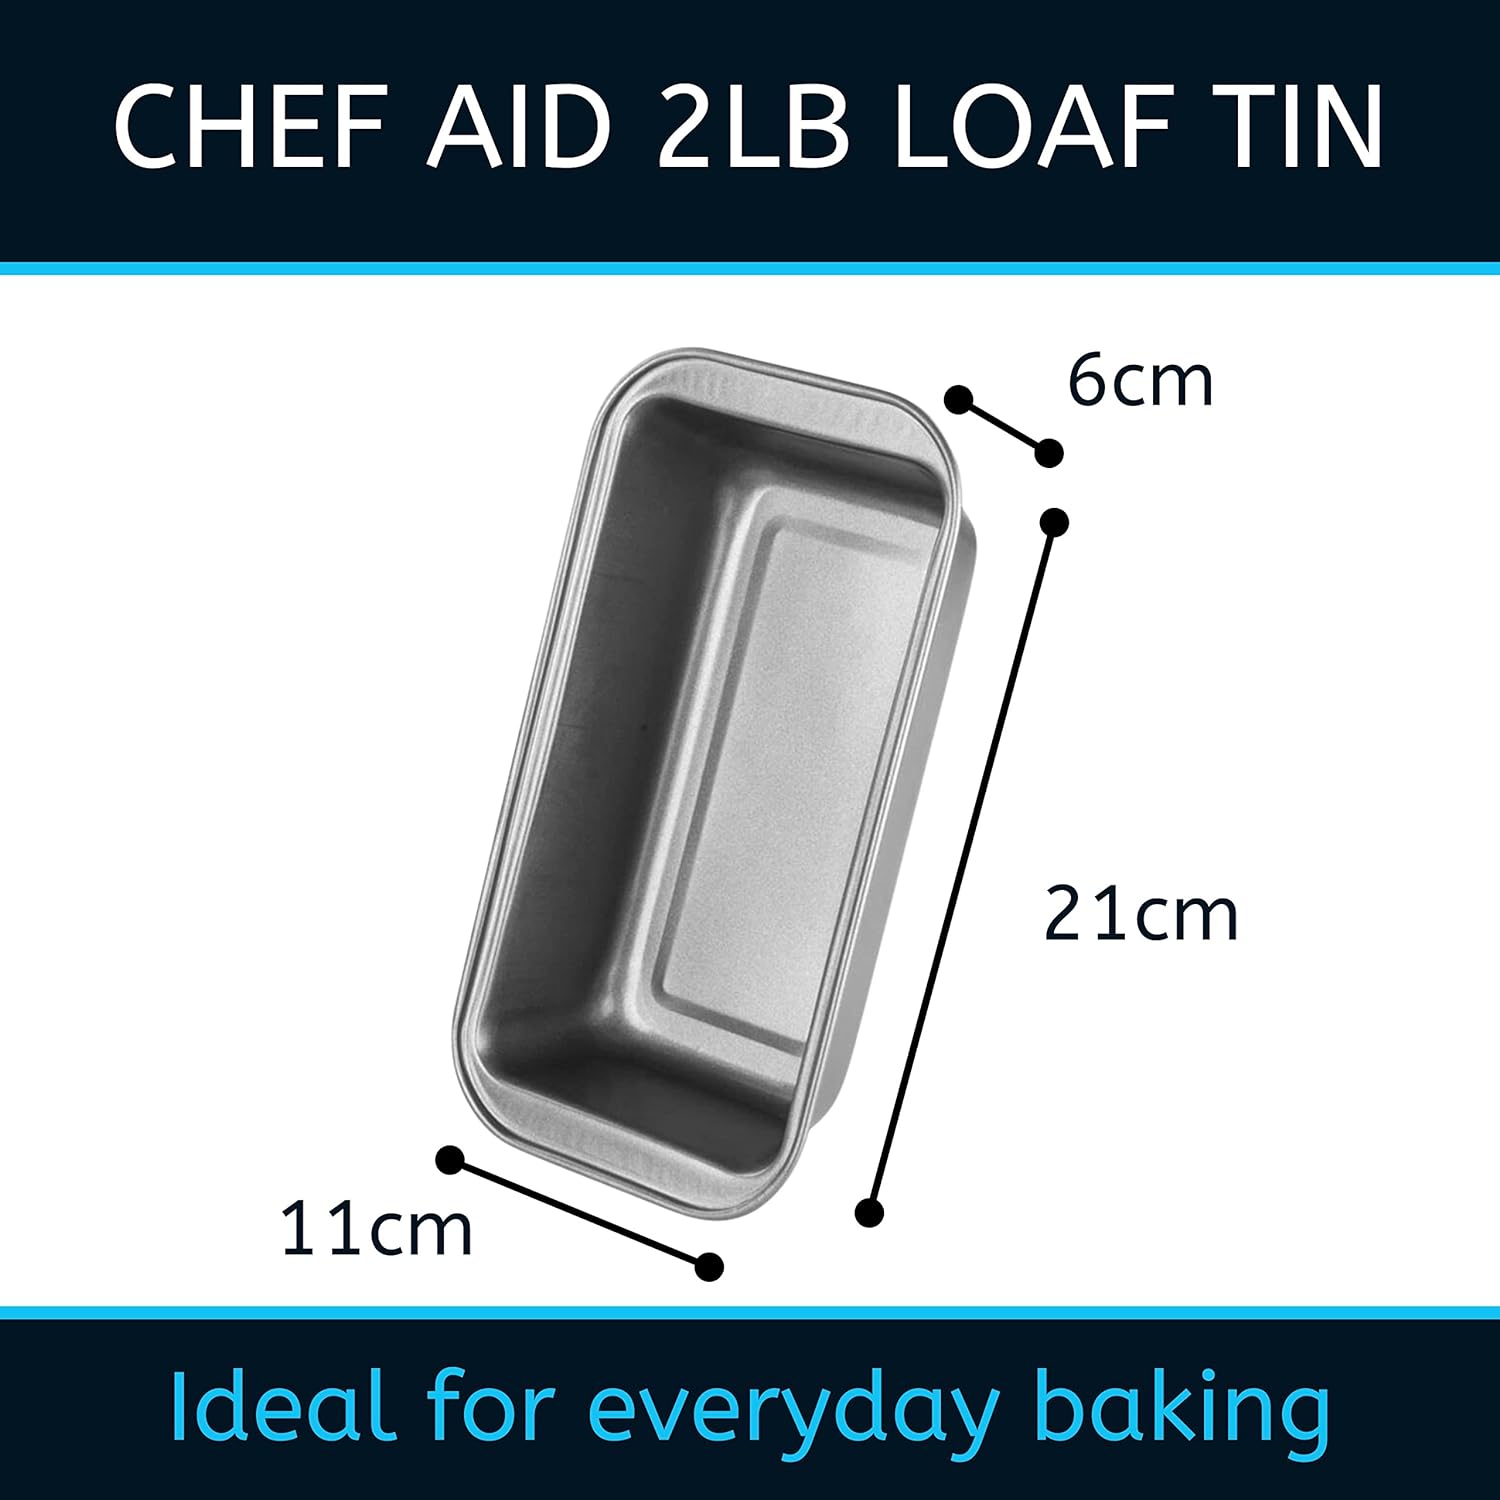 Chef Aid Non-stick 2lb Loaf Tin, 900g Rectangular bread pan, 21cm x 11cm x 7cm. Ideal for Bread, Loaves, Cakes and Bakes. Dishwasher, Fridge and Freezer safe, Grey 5012